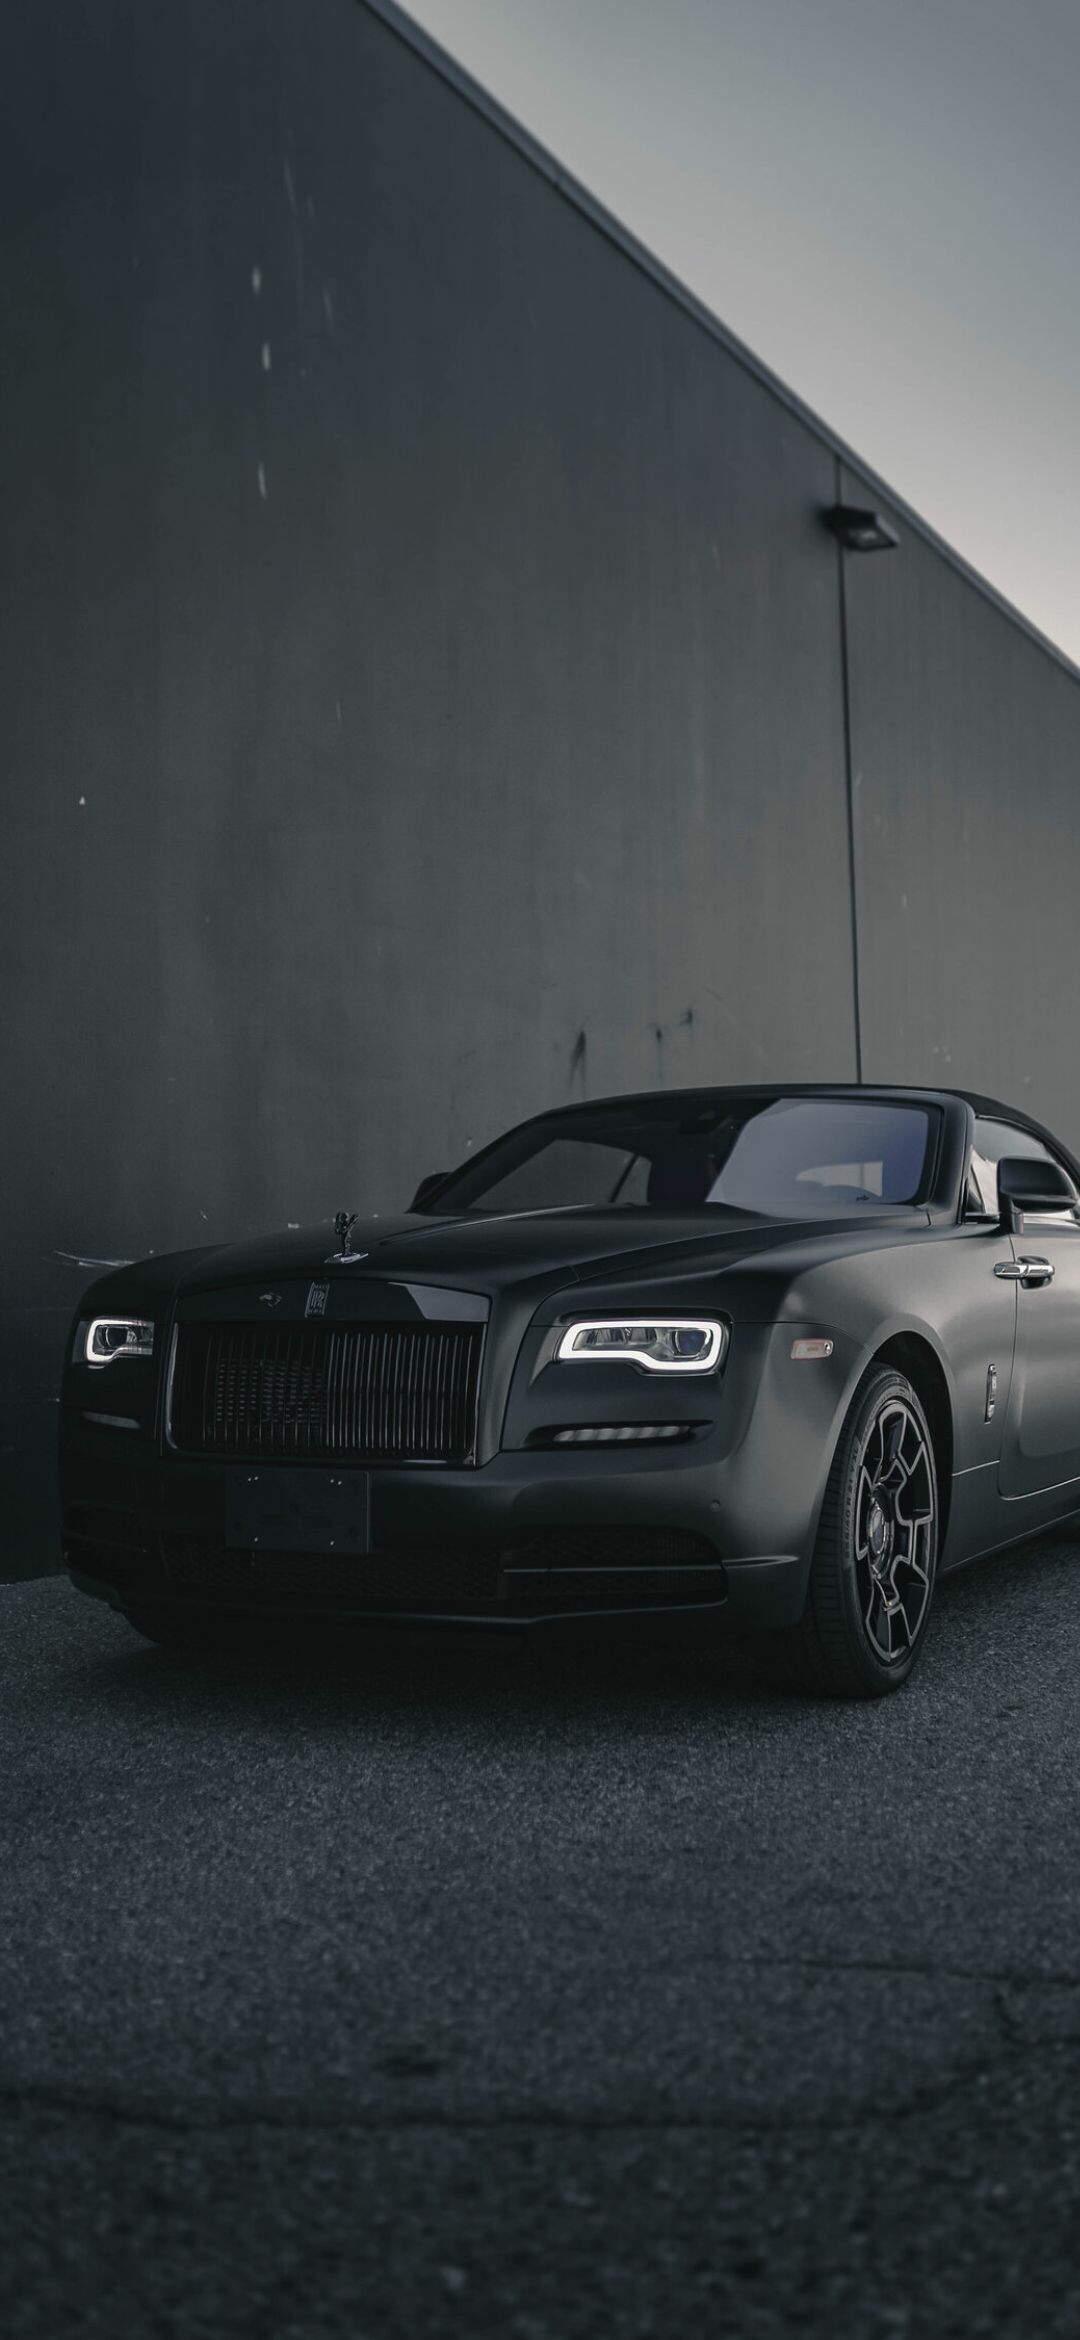 Rolls-Royce wallpapers, Top 35 backgrounds, High-quality images, Download now, 1080x2340 HD Phone